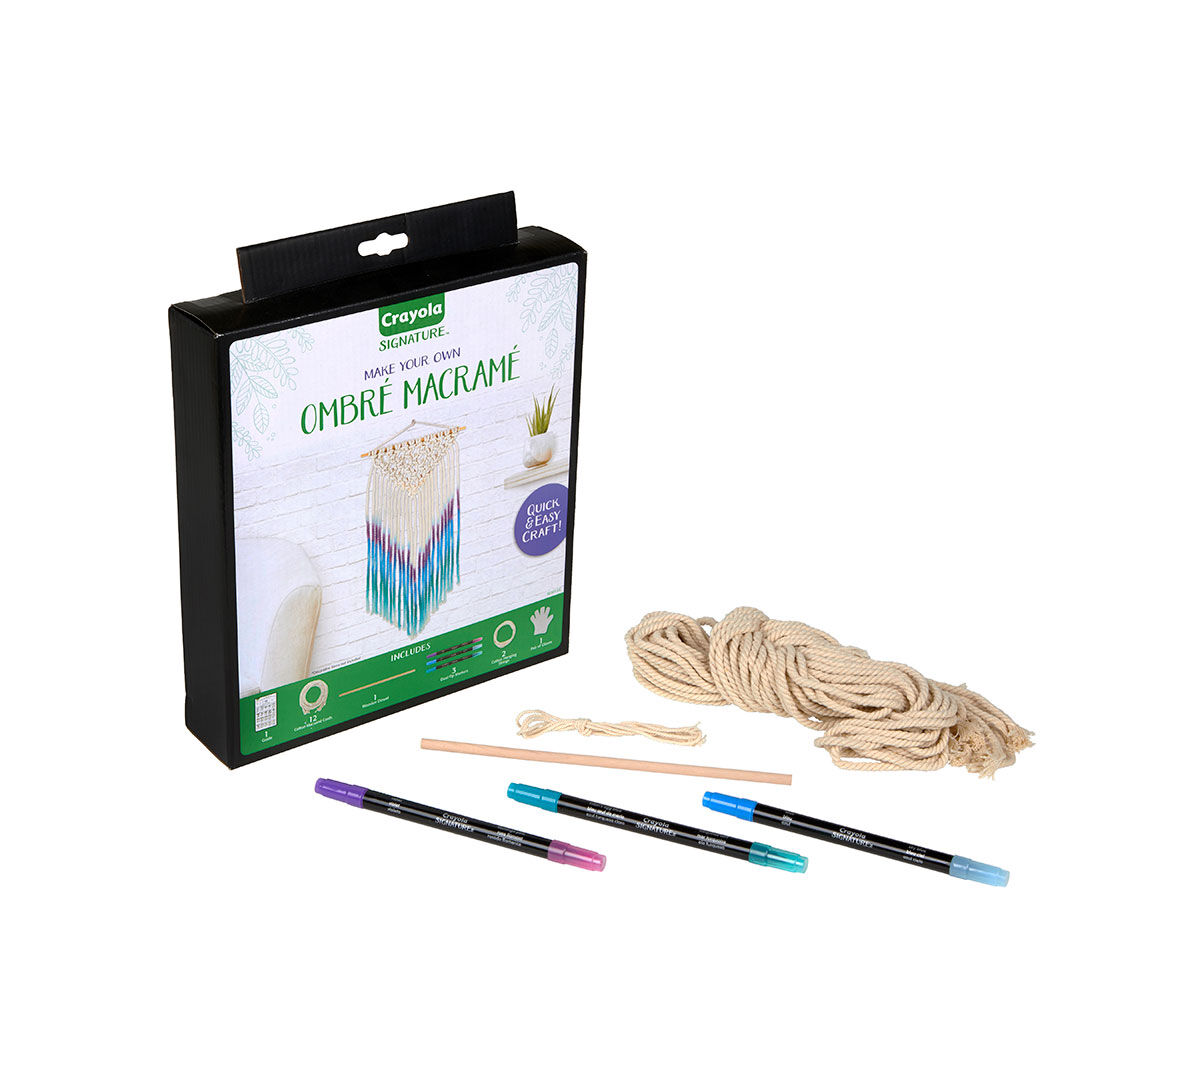 Crayola Signature Make Your Own Ombre Macrame Kit Quick & Easy Craft! 